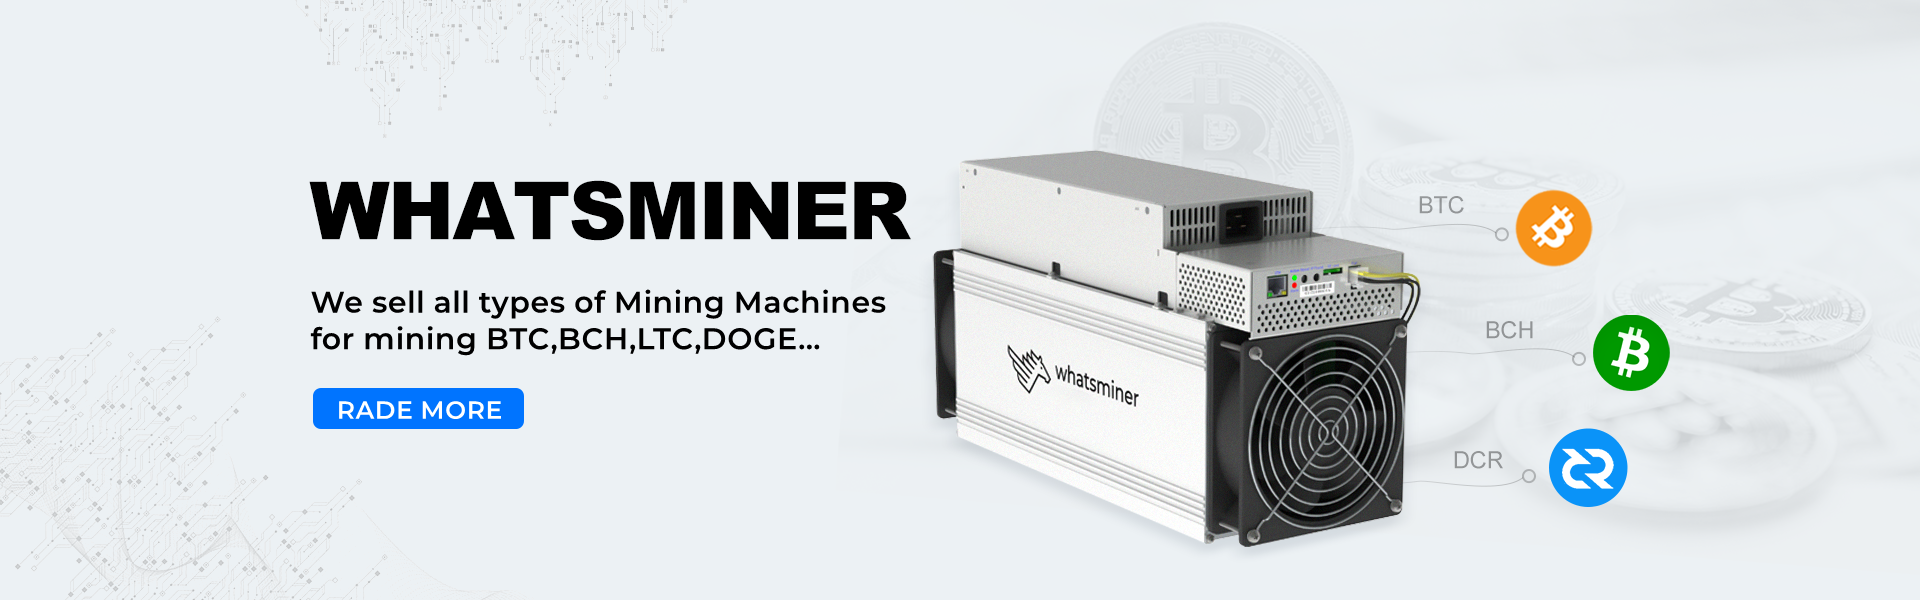 PC端WHATMINER_副本